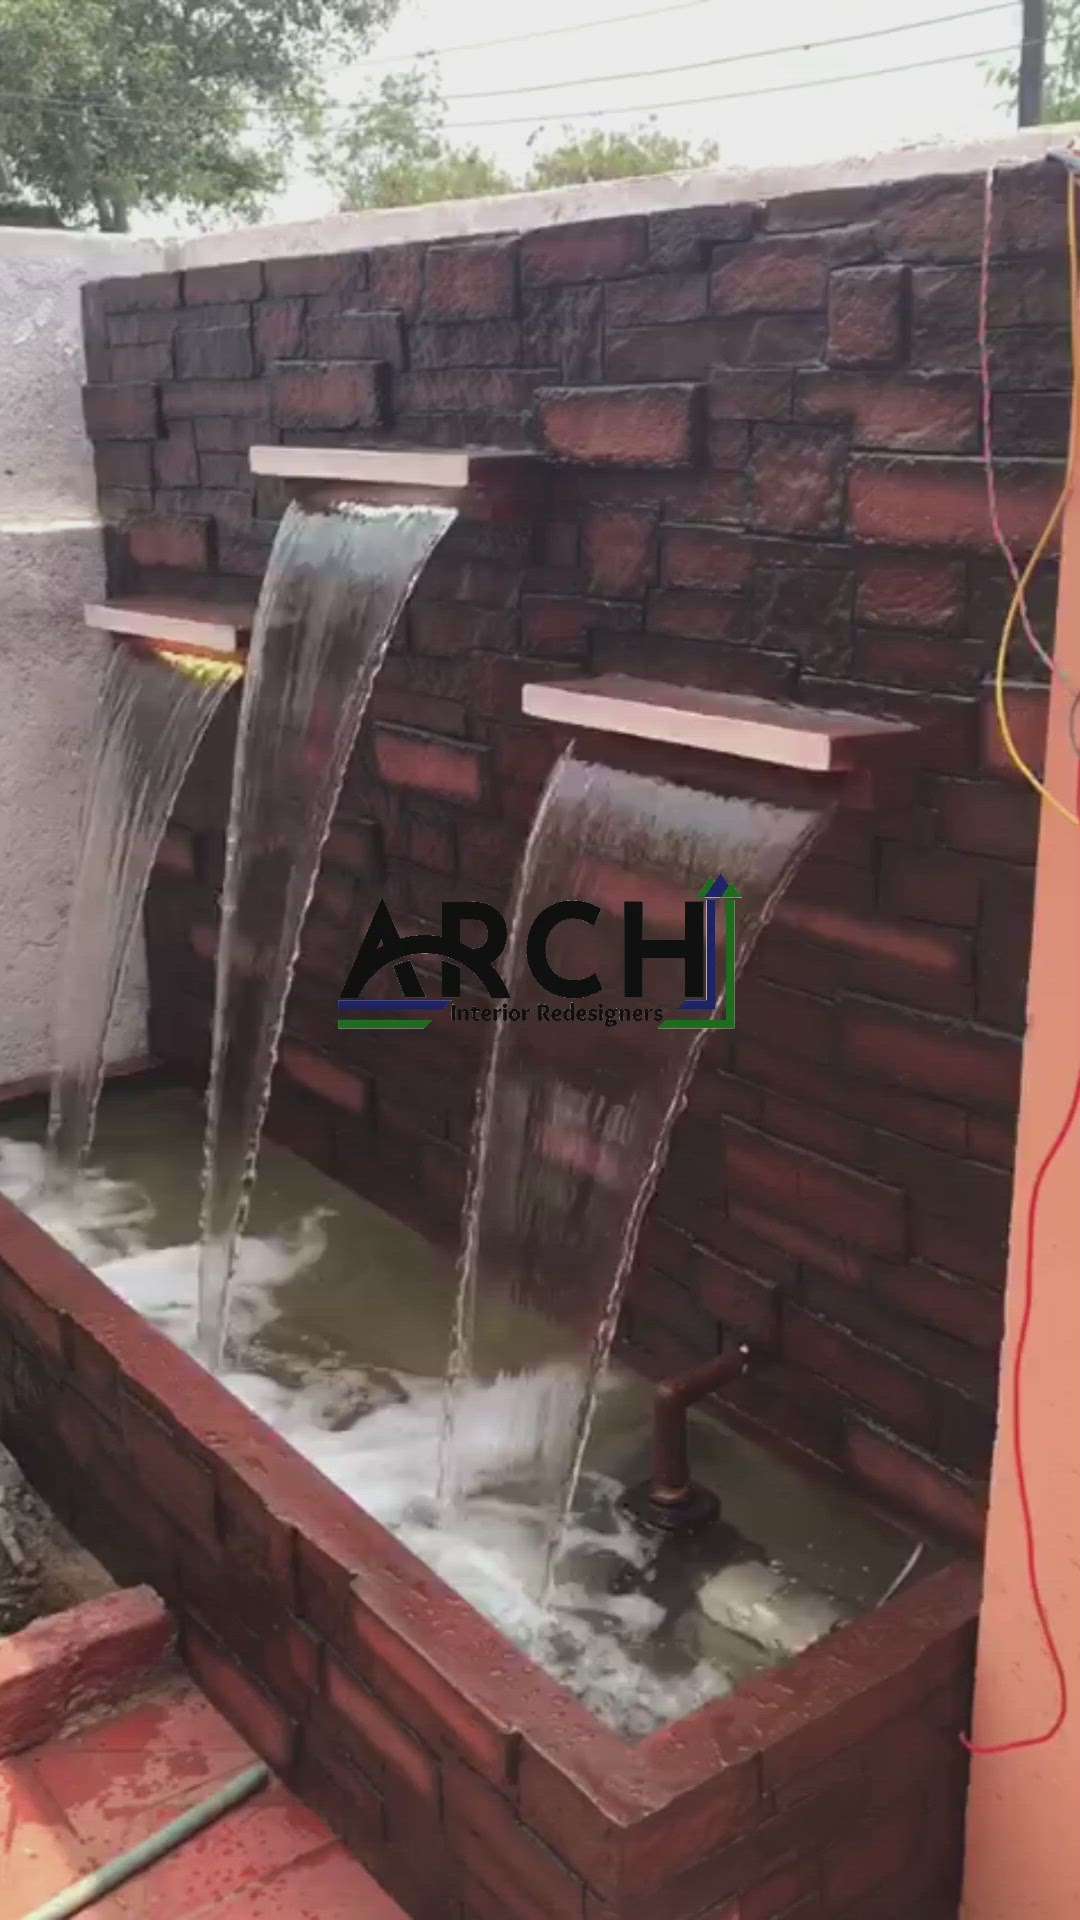 3 Blade Cascade waterfall ⛲🪴
@arch_interior_redesigners 

Various designs andsized are available
DM for customisation...

Trouble in Designing space or wanted some transformation in a cost-effective way
Contact for *FREE* Consultation: 9713214957
Or whatsapp your queries at 9713214957

#archinteriorredesigners
#interiordesign #diy #cascade #bladewaterfall #cascadefalls #stainless_steel #waterfall #gardendecor #waterfalls #walldecor #wallart #bhopalinteriordesigner #bhopal_the_city_of_lakes #bhopal #mpnagarzone1